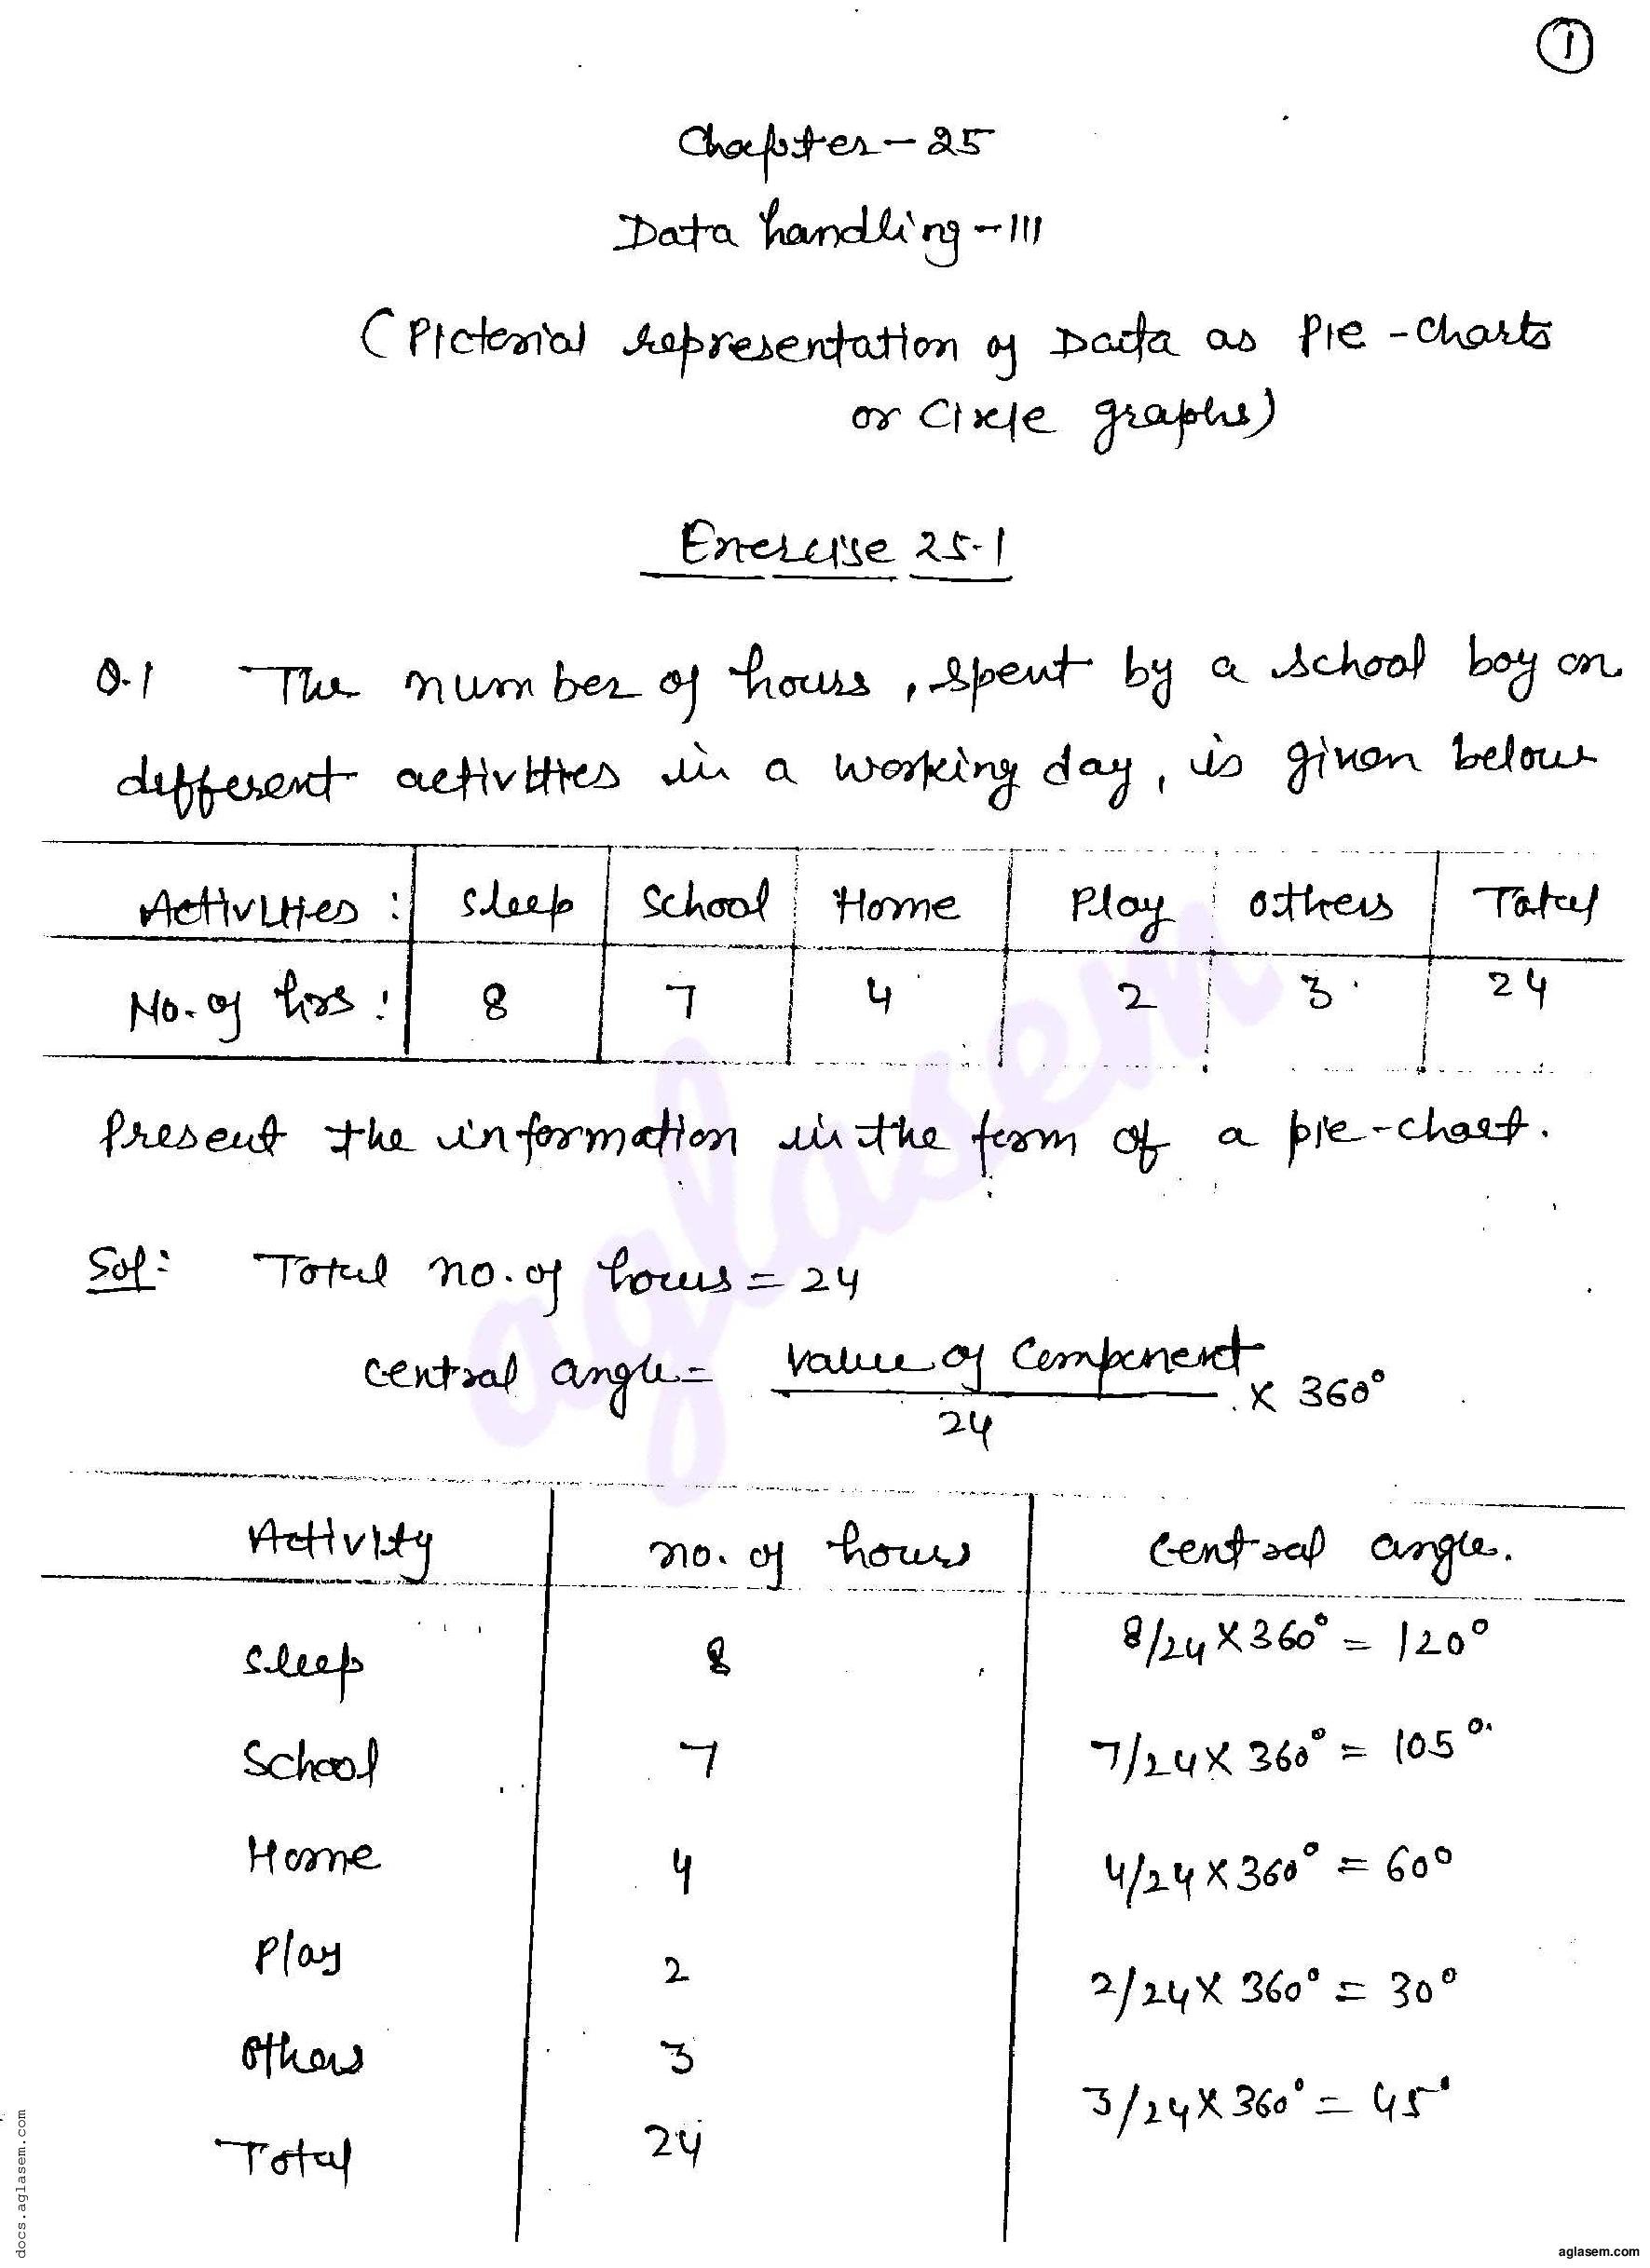 RD Sharma Solutions Class 8 Chapter 25 Data Handling III Pictorial Representation of Data as Pie Charts Exercise 25.1 - Page 1